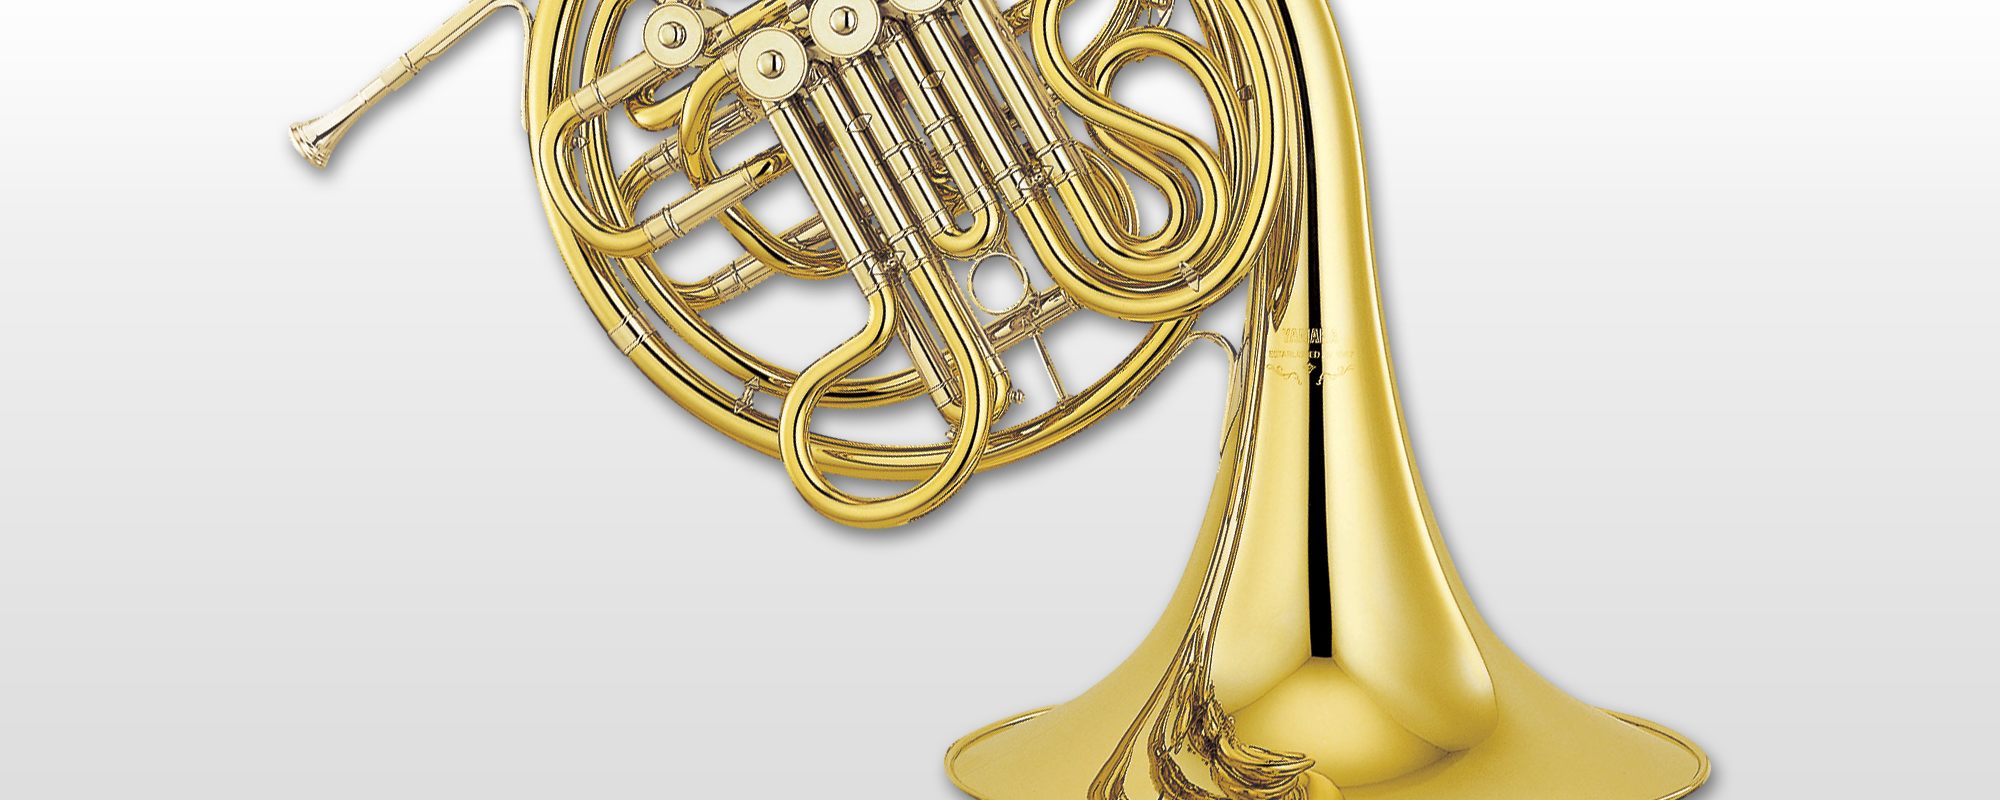 YHR-668 - Overview - French Horns - Brass & Woodwinds - Musical 